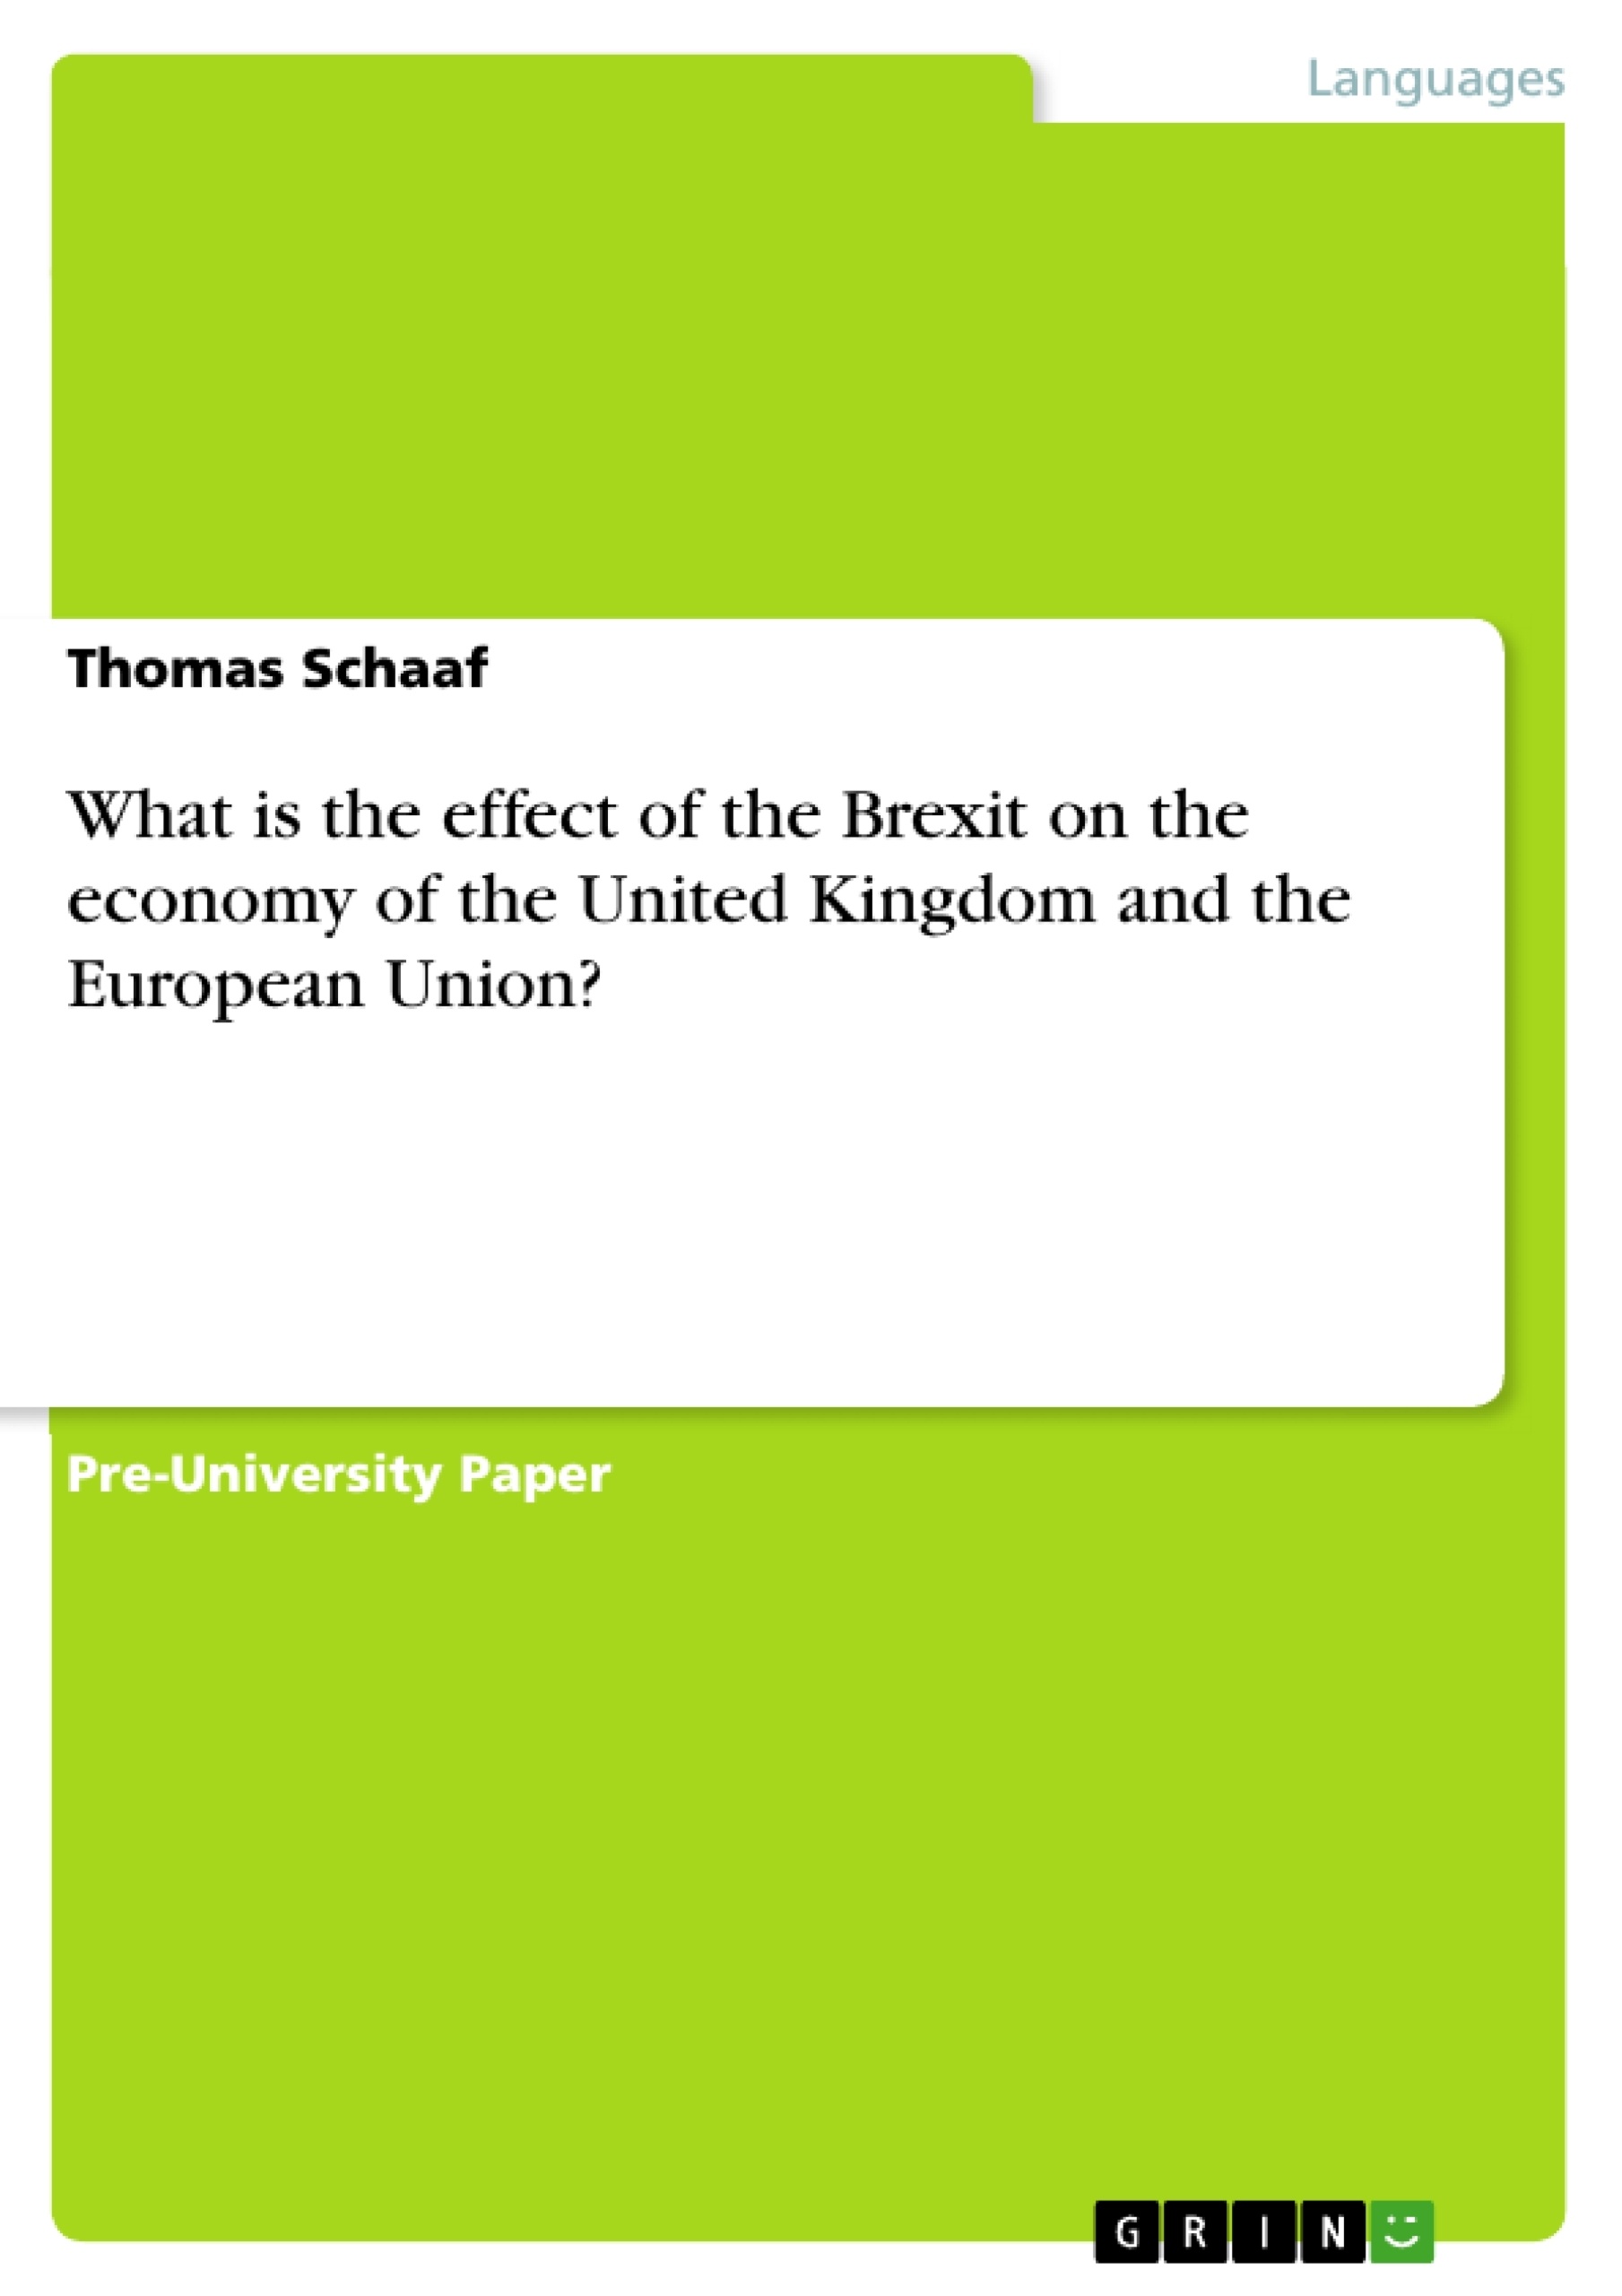 Title: What is the effect of the Brexit on the economy of the United Kingdom and the European Union?